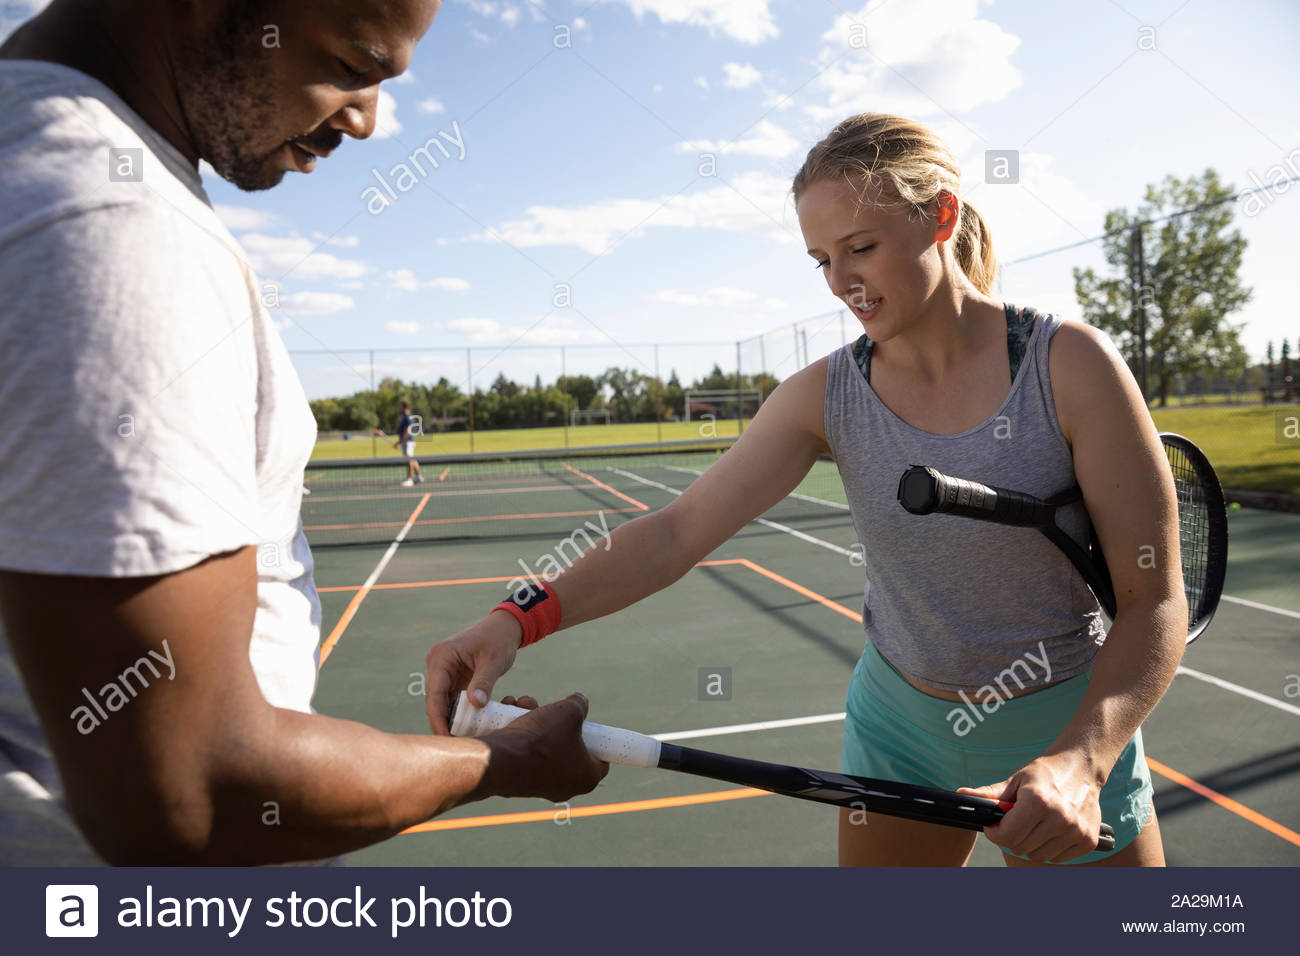 Young woman teaching man how to grip tennis racket on sunny tennis racket Stock Photo